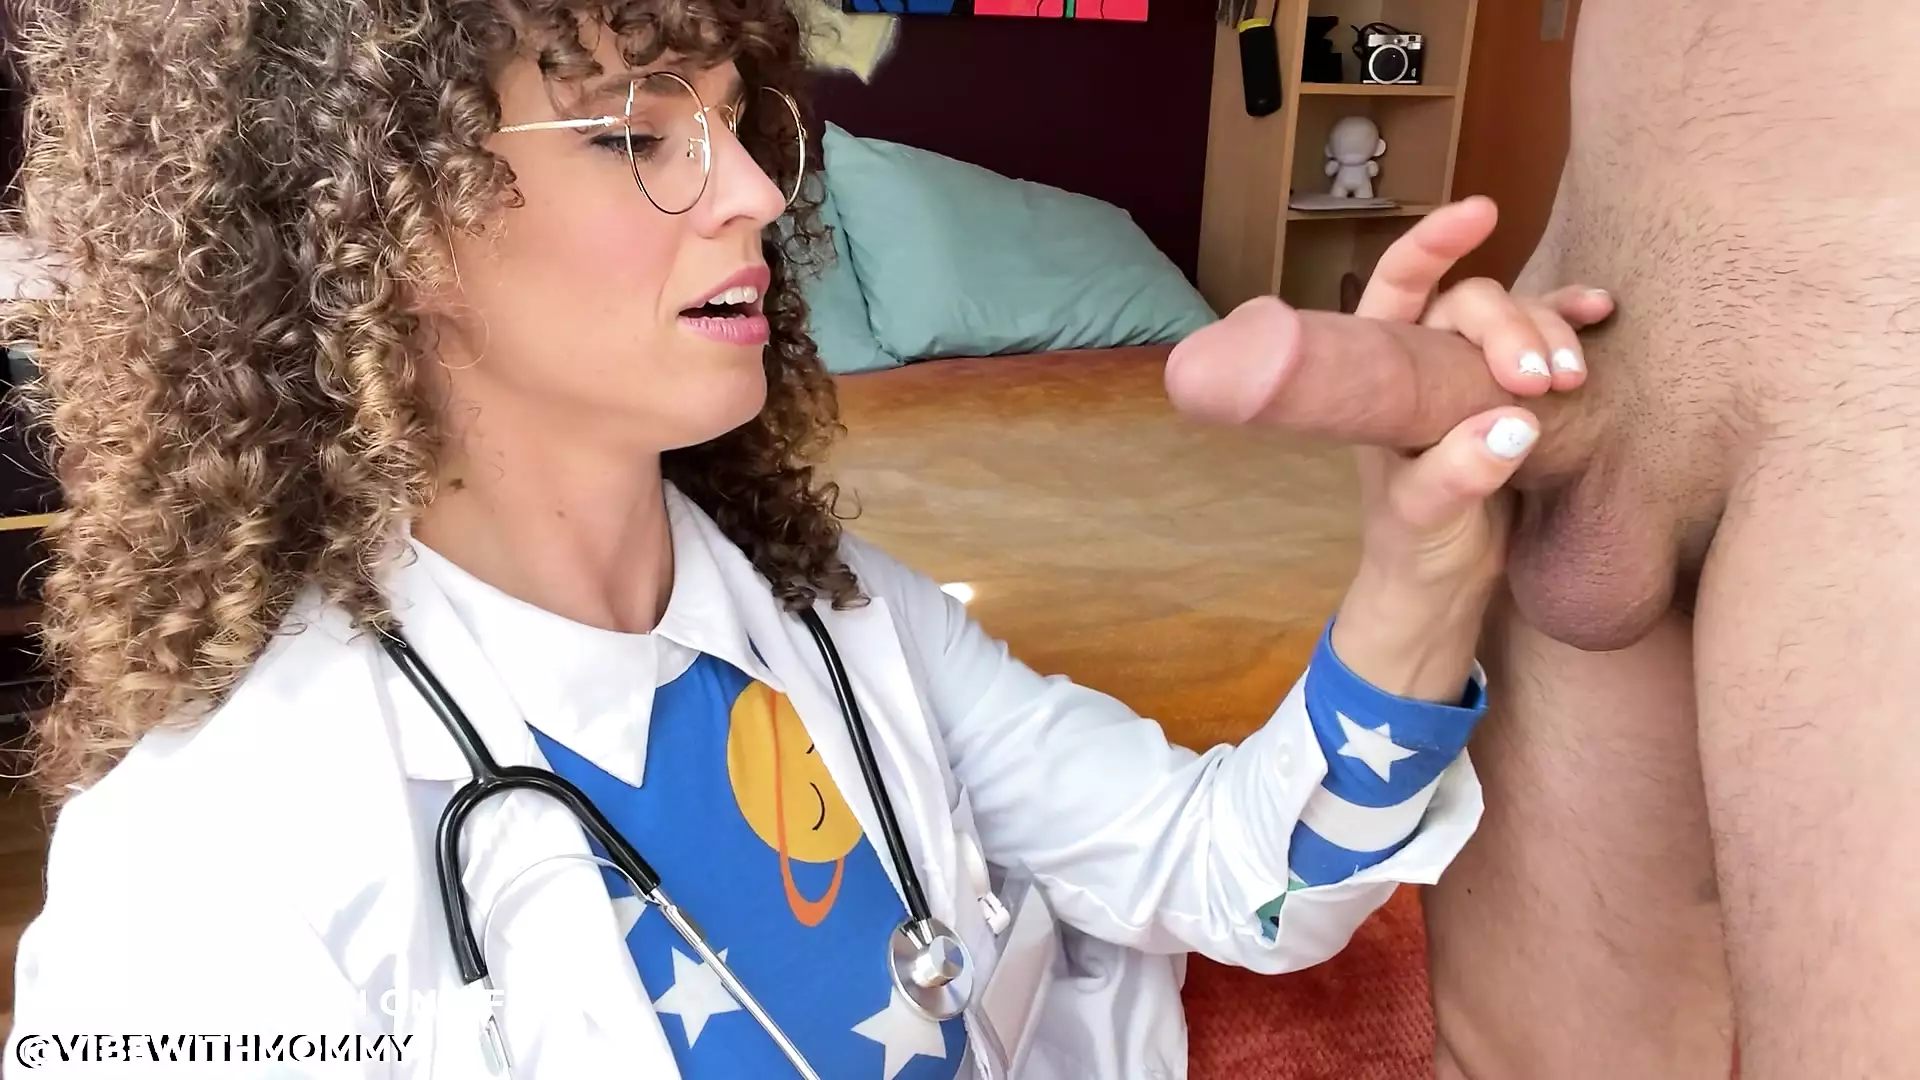 Circumcised Gang Bang - JEWISH DOCTOR LOVES YOUR CIRCUMCISION with VibeWithMommy | xHamster